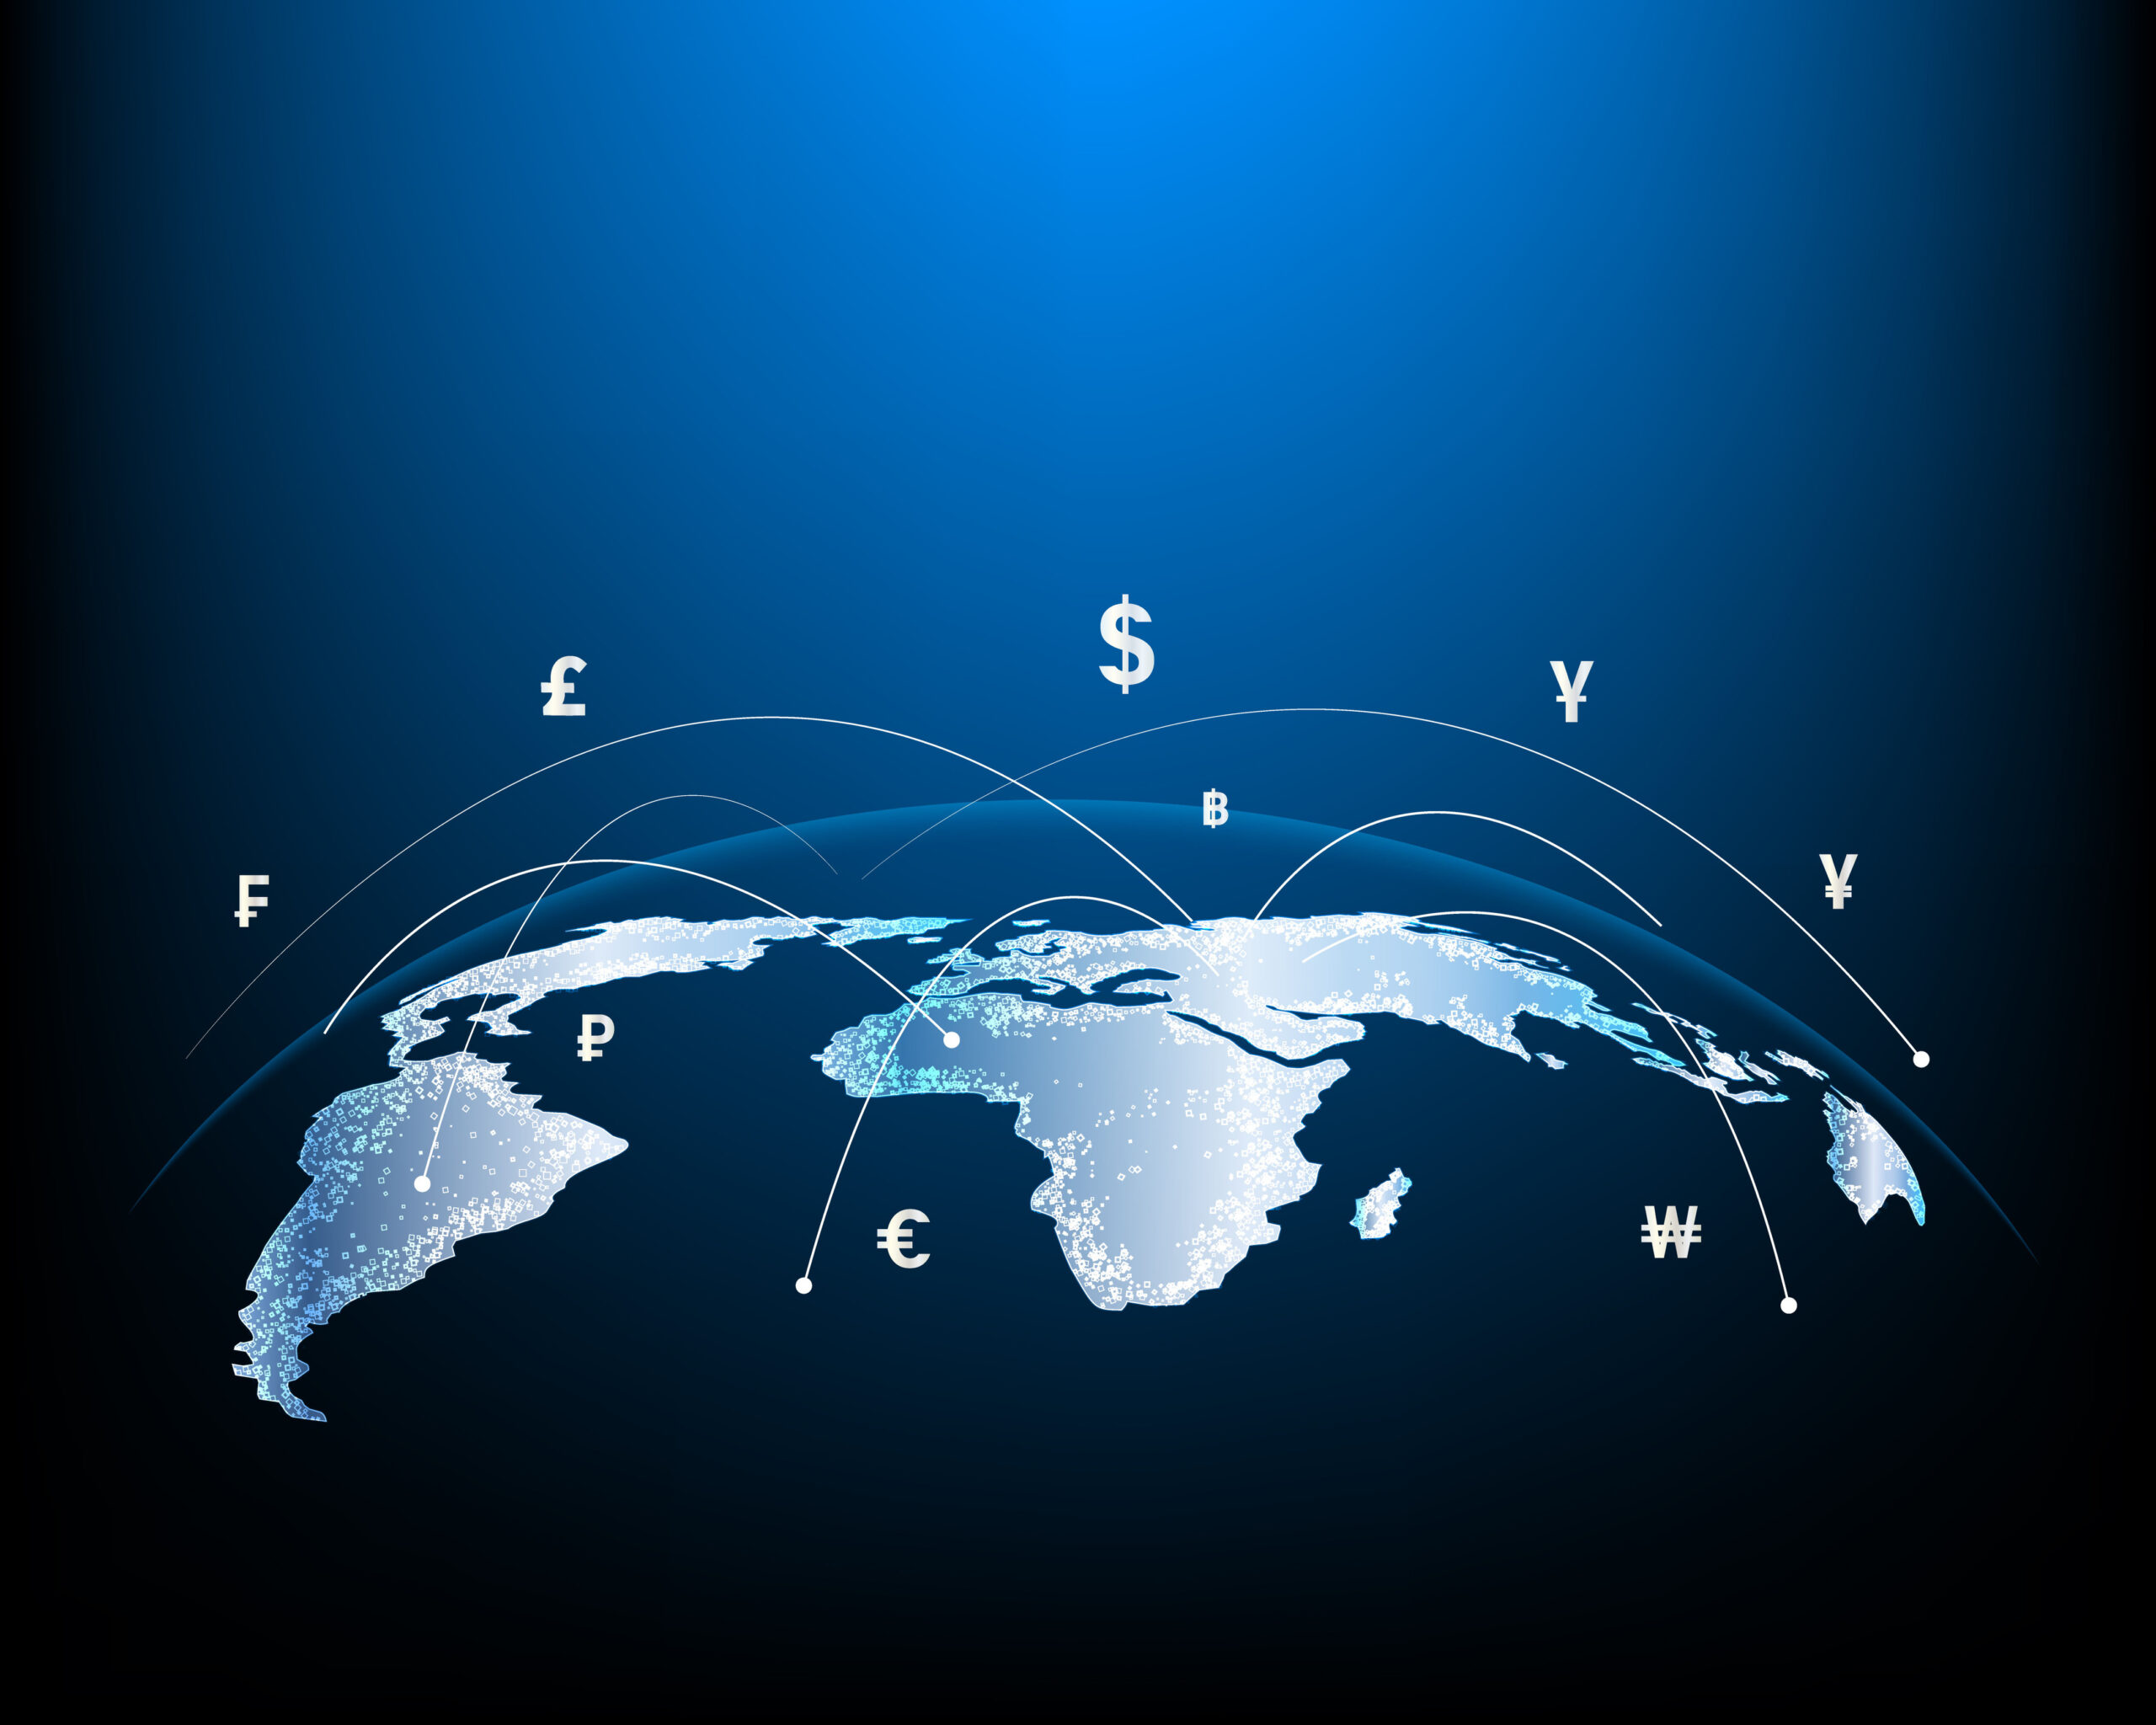 Currency network and money transfers and currency exchanges between countries of the world